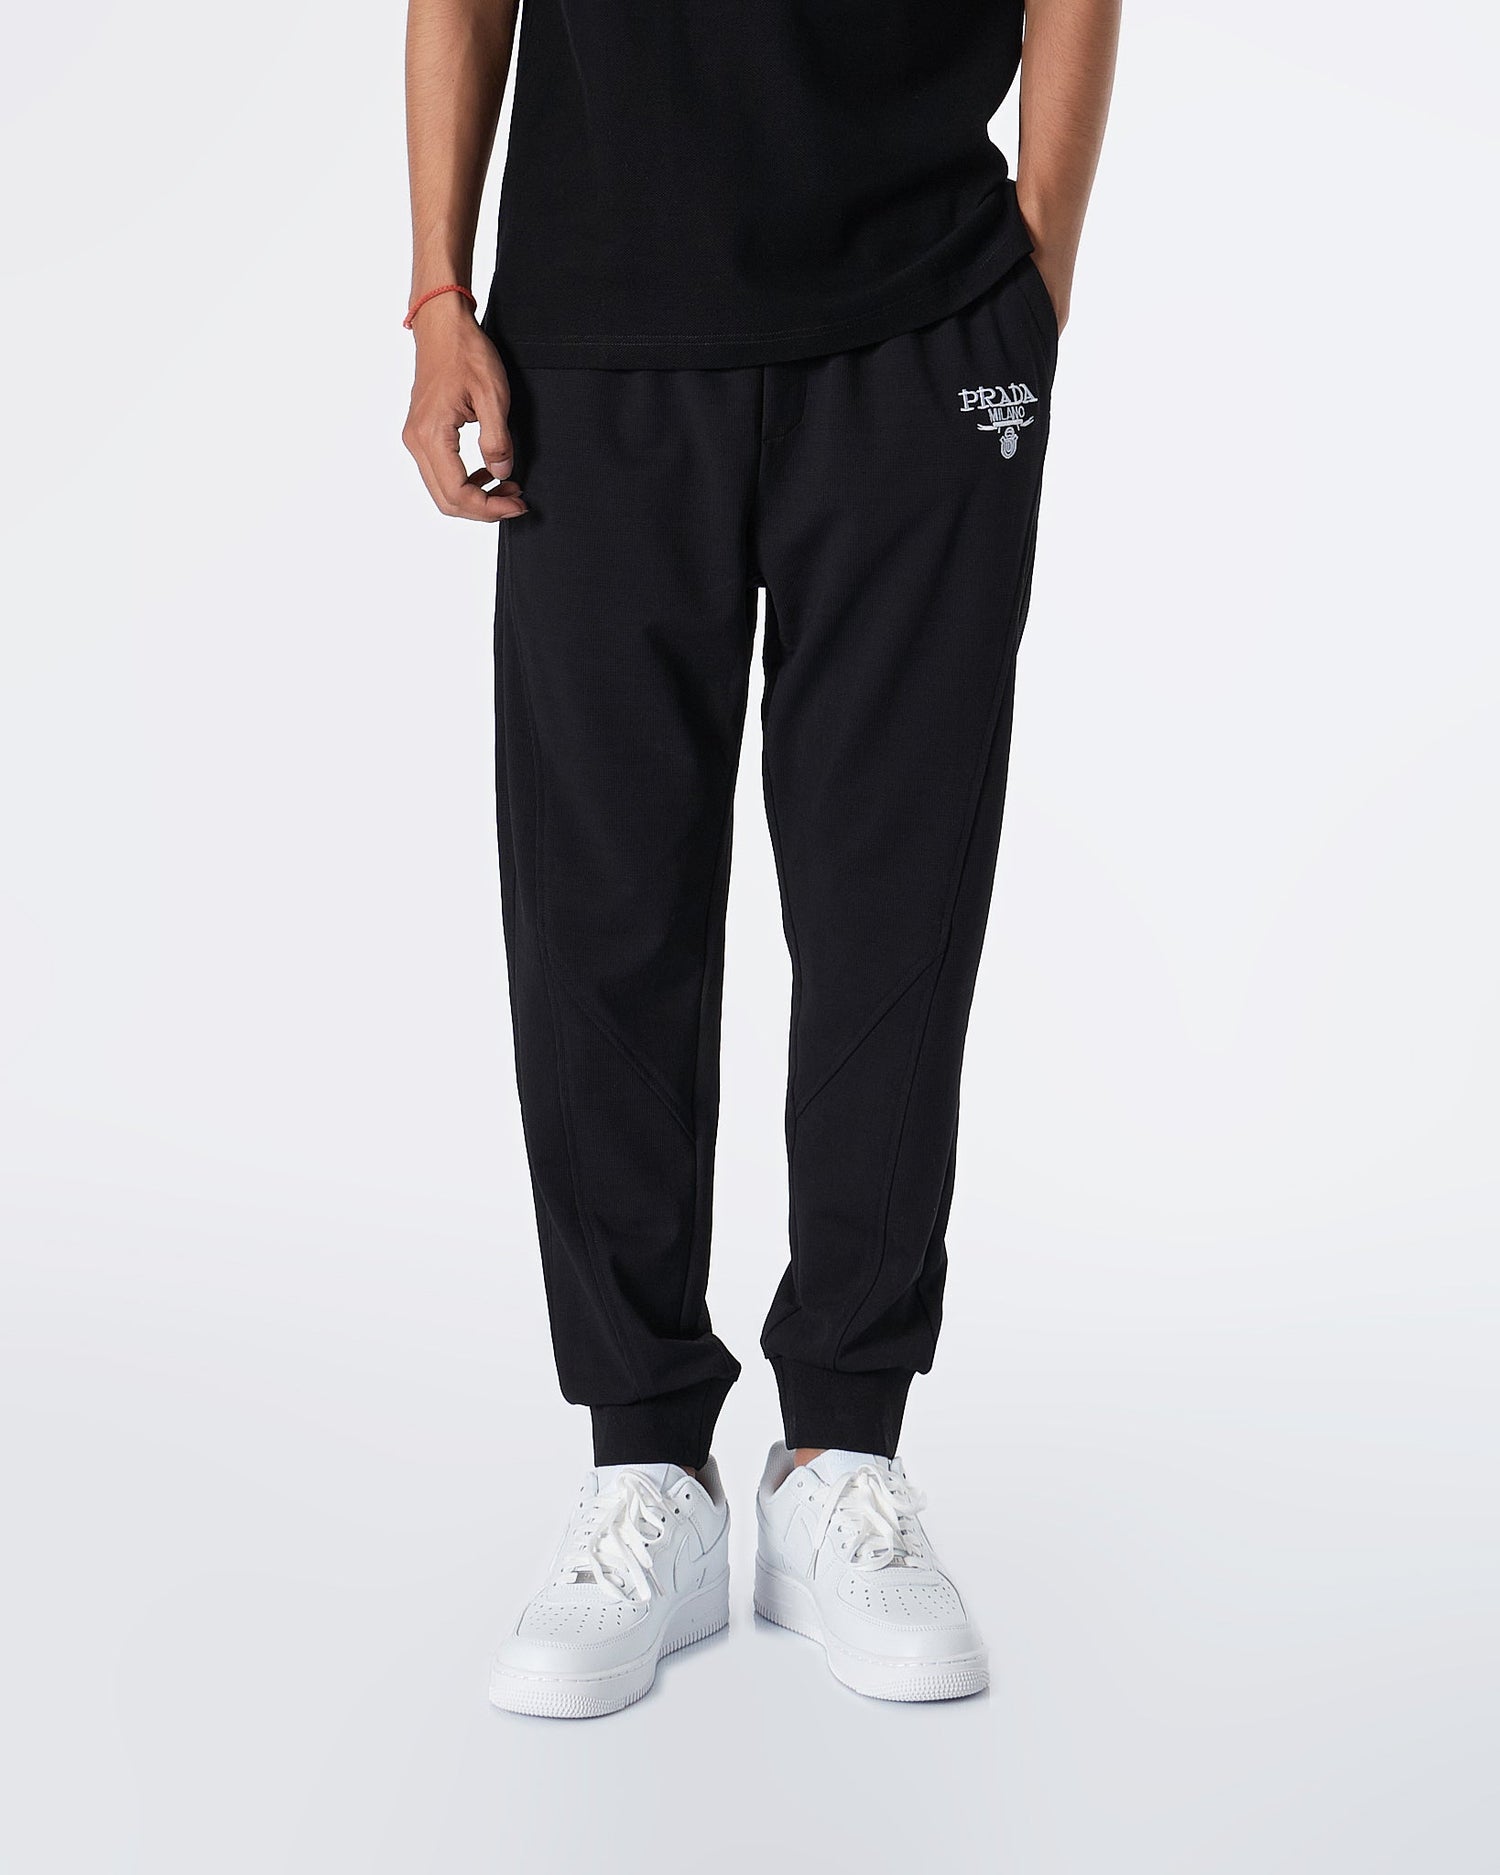 MOI OUTFIT-PD Milano Men Joggers 69.90